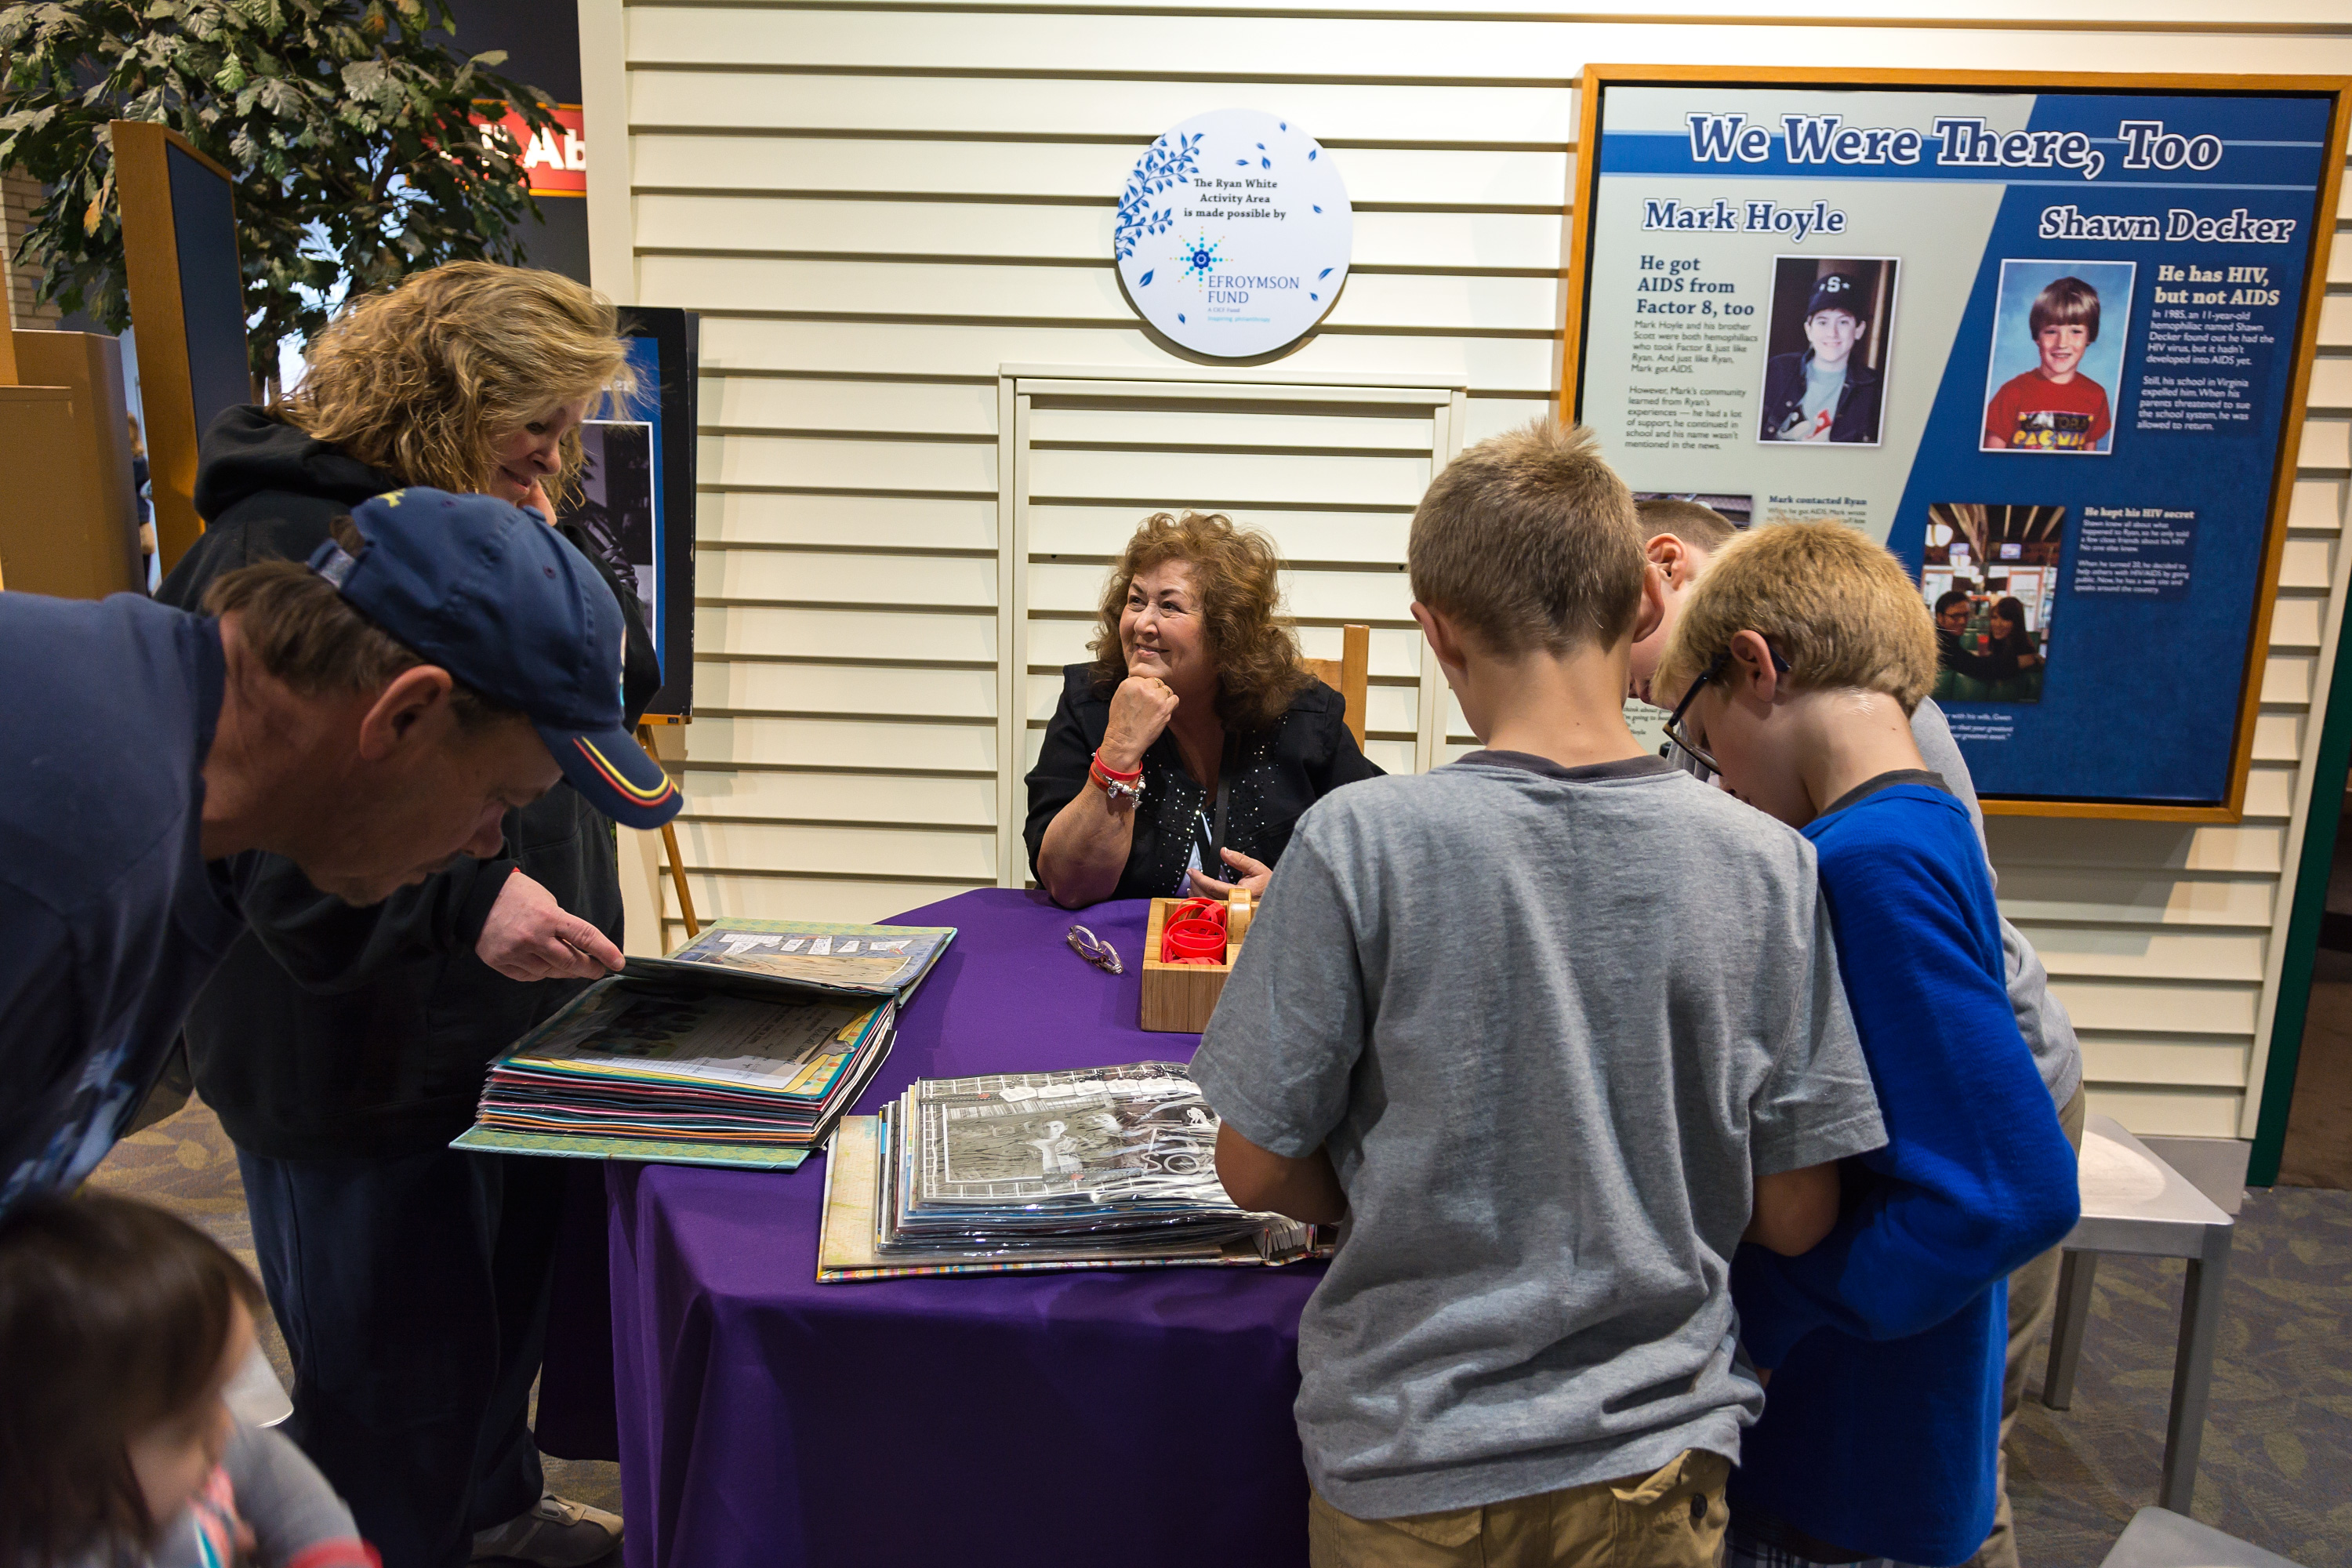 Jeanne White Ginder shares scrapbooks of Ryan's life at the world's largest children's museum.